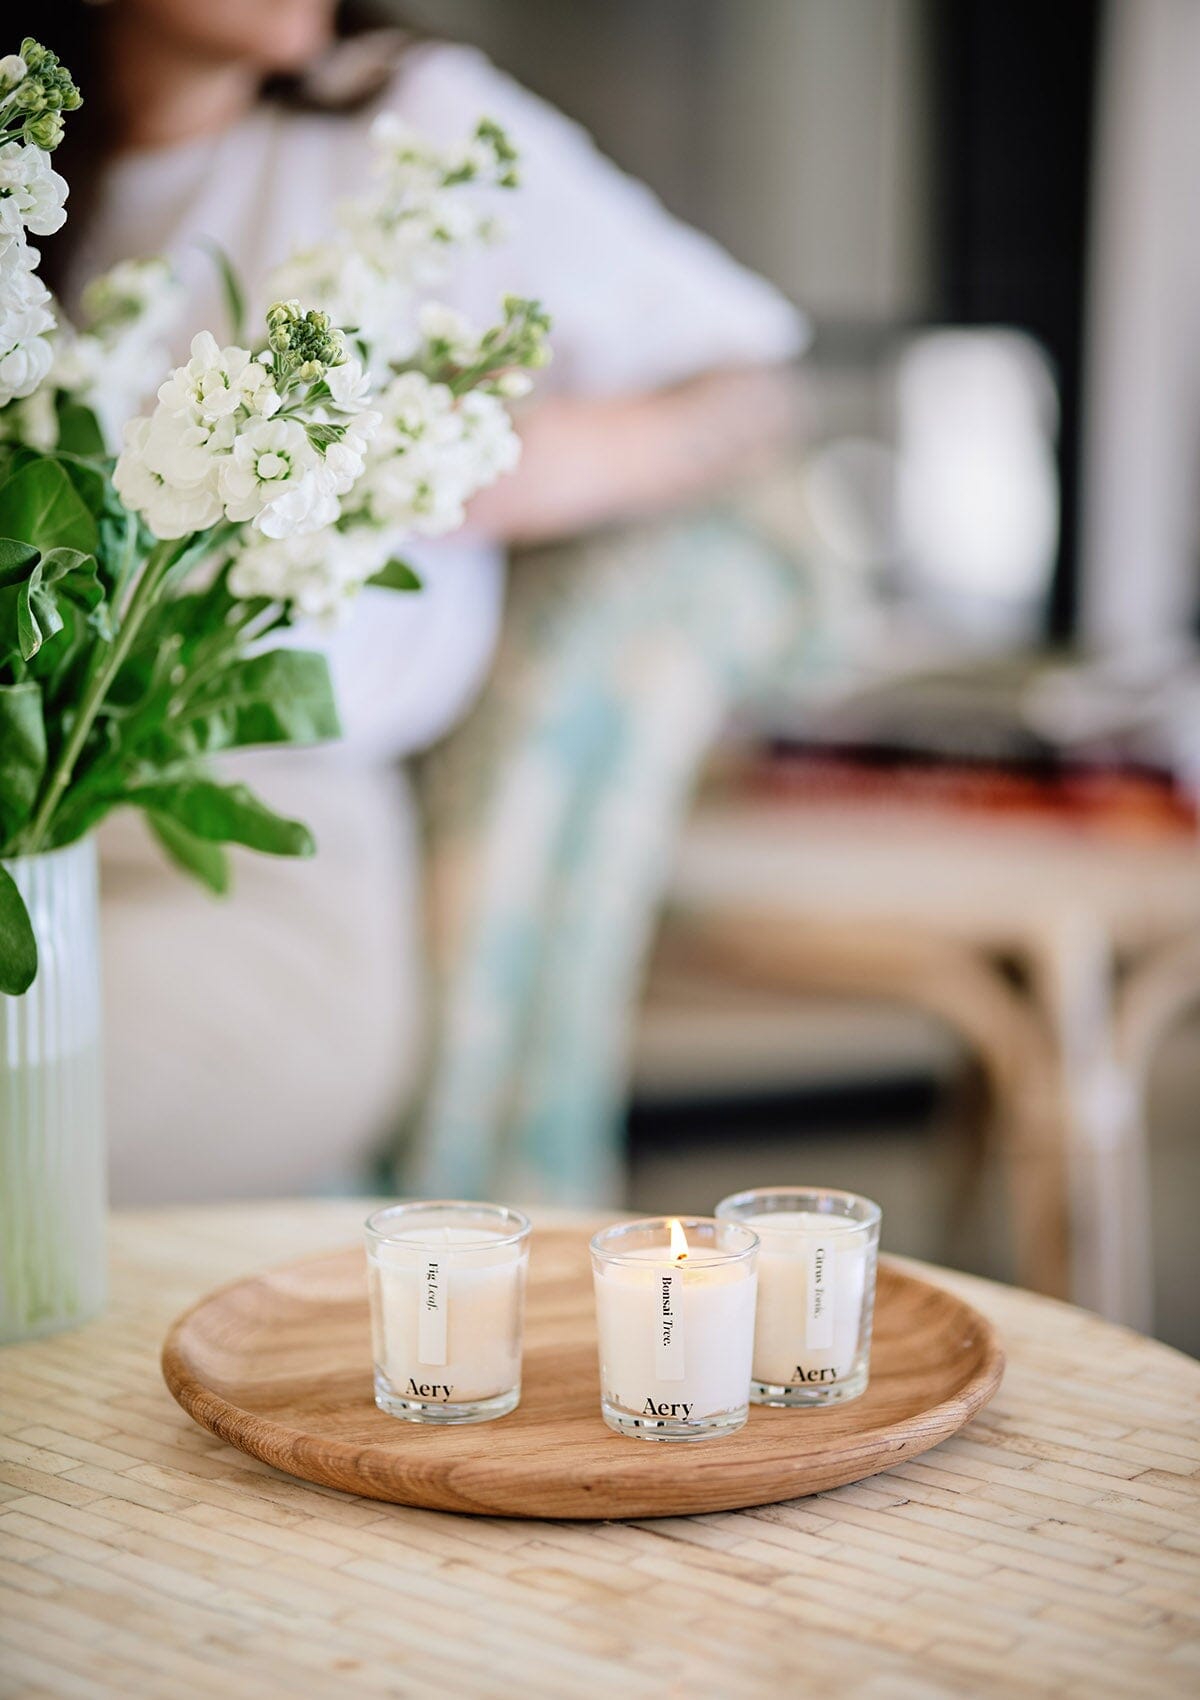 Cream botanical set of three candles Displayed on wooden tray with vase of white flowers